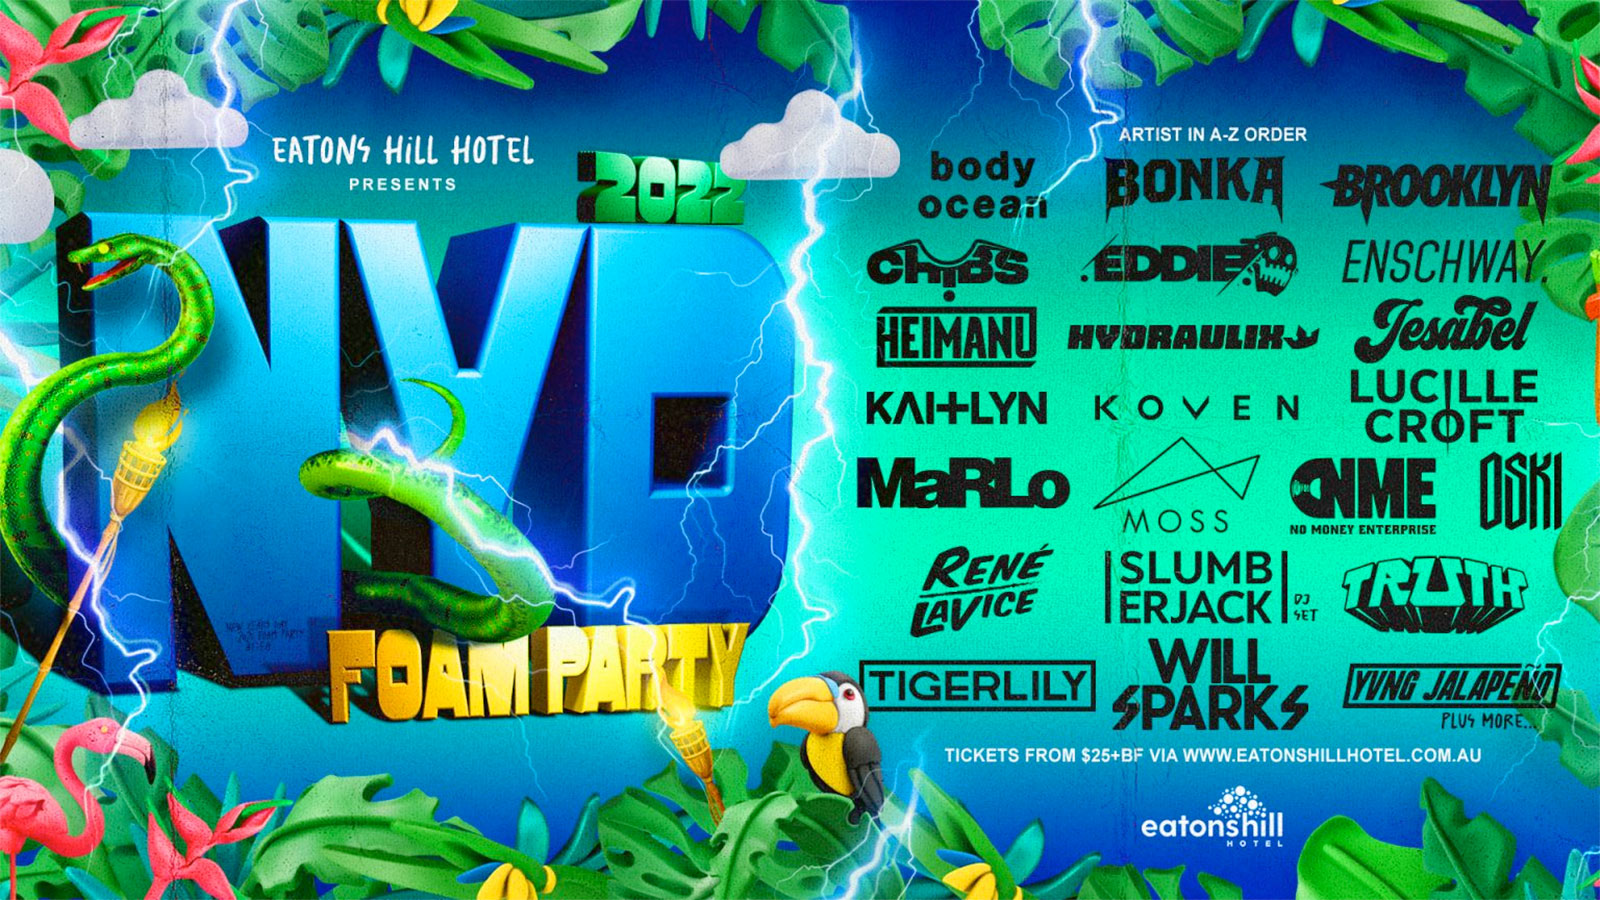 eatons-hill-hotel-nyd-foam-party-2022-poster-oz-edm